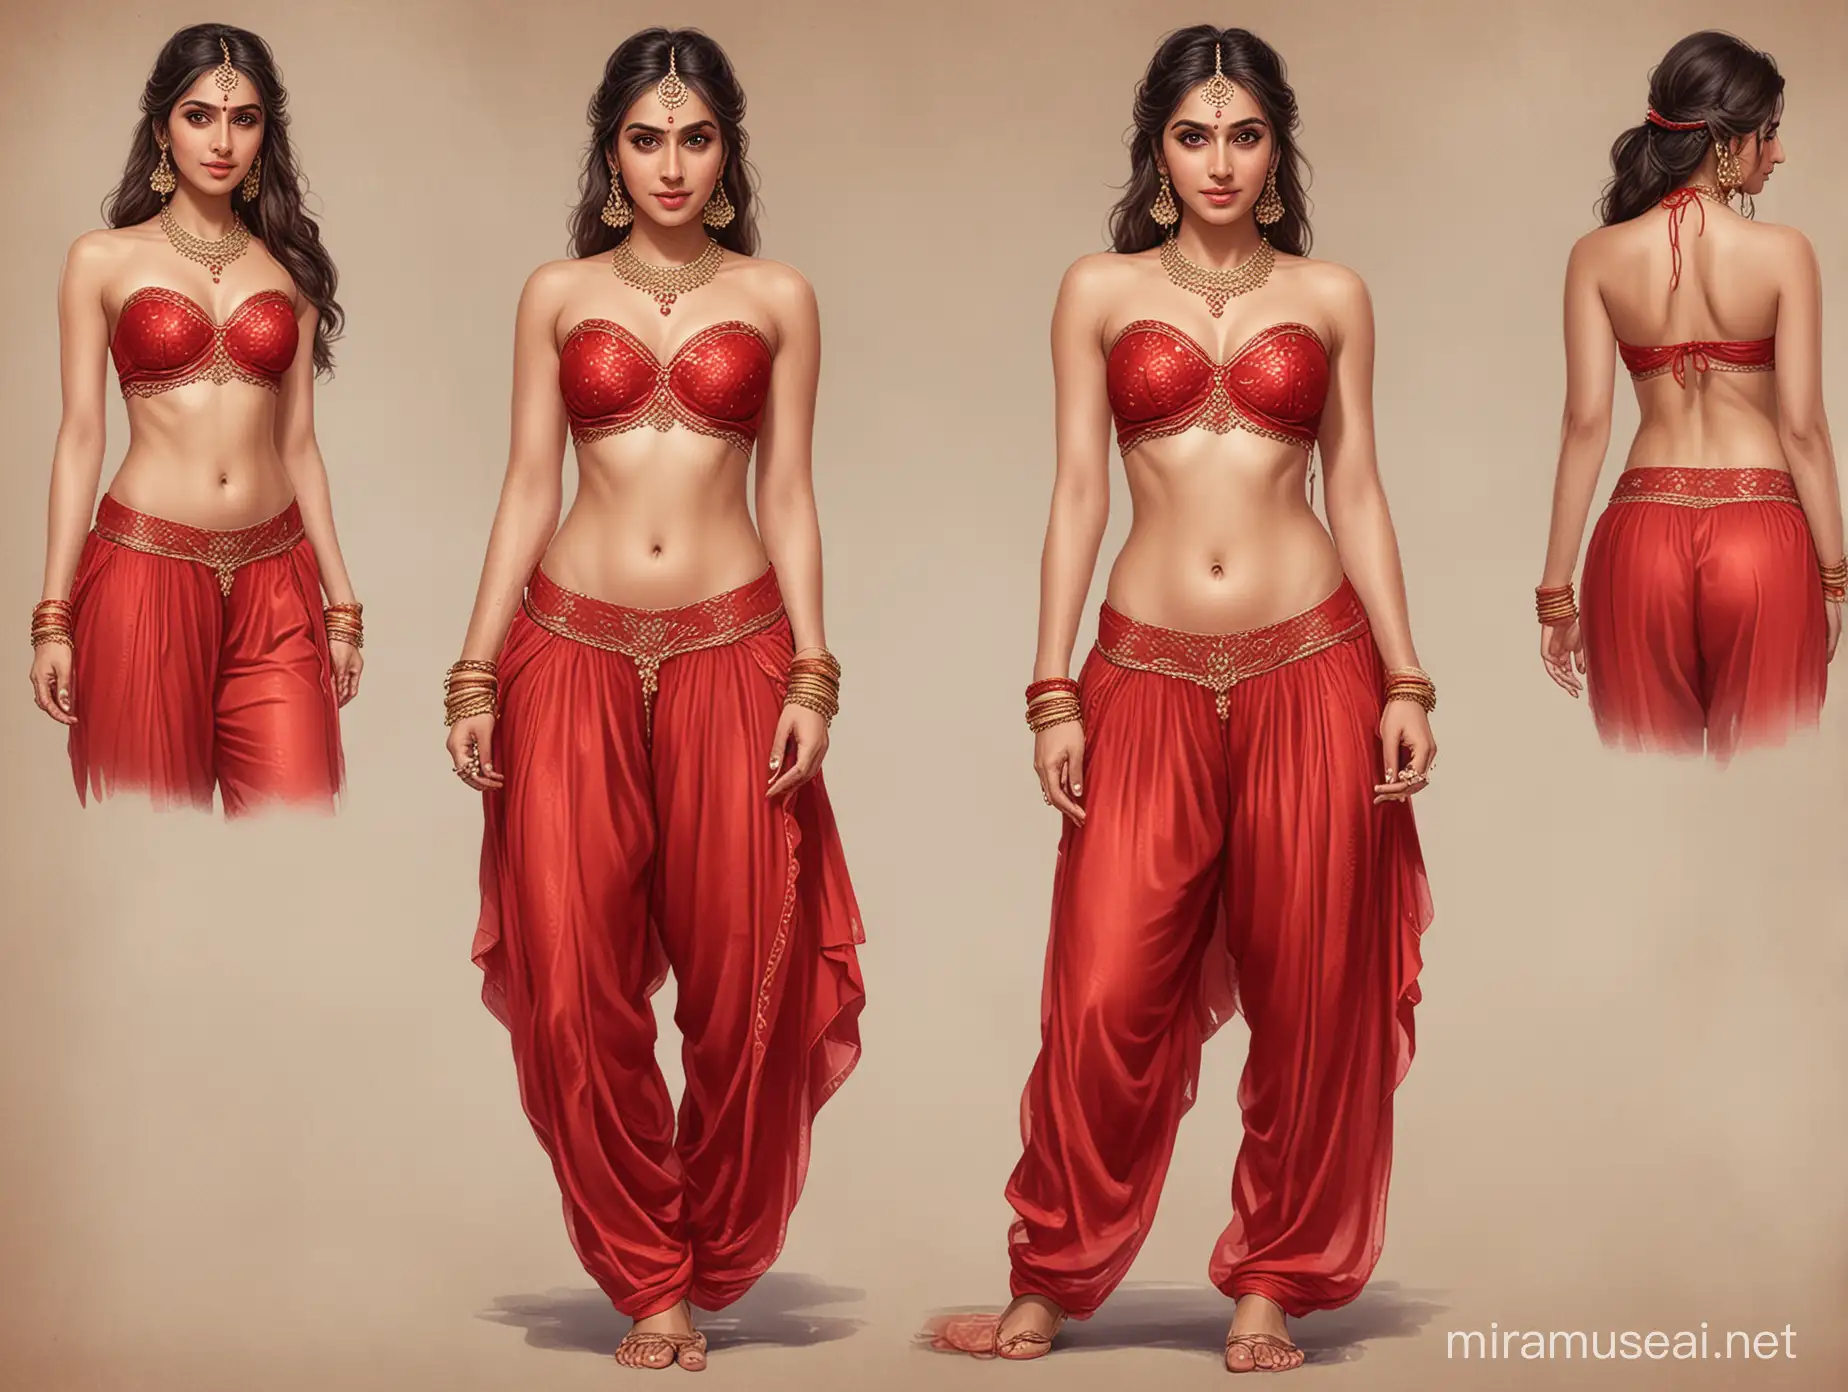 Anita Hasnandani in Elegant Red Lingerie and Harem Pants with Traditional Accessories